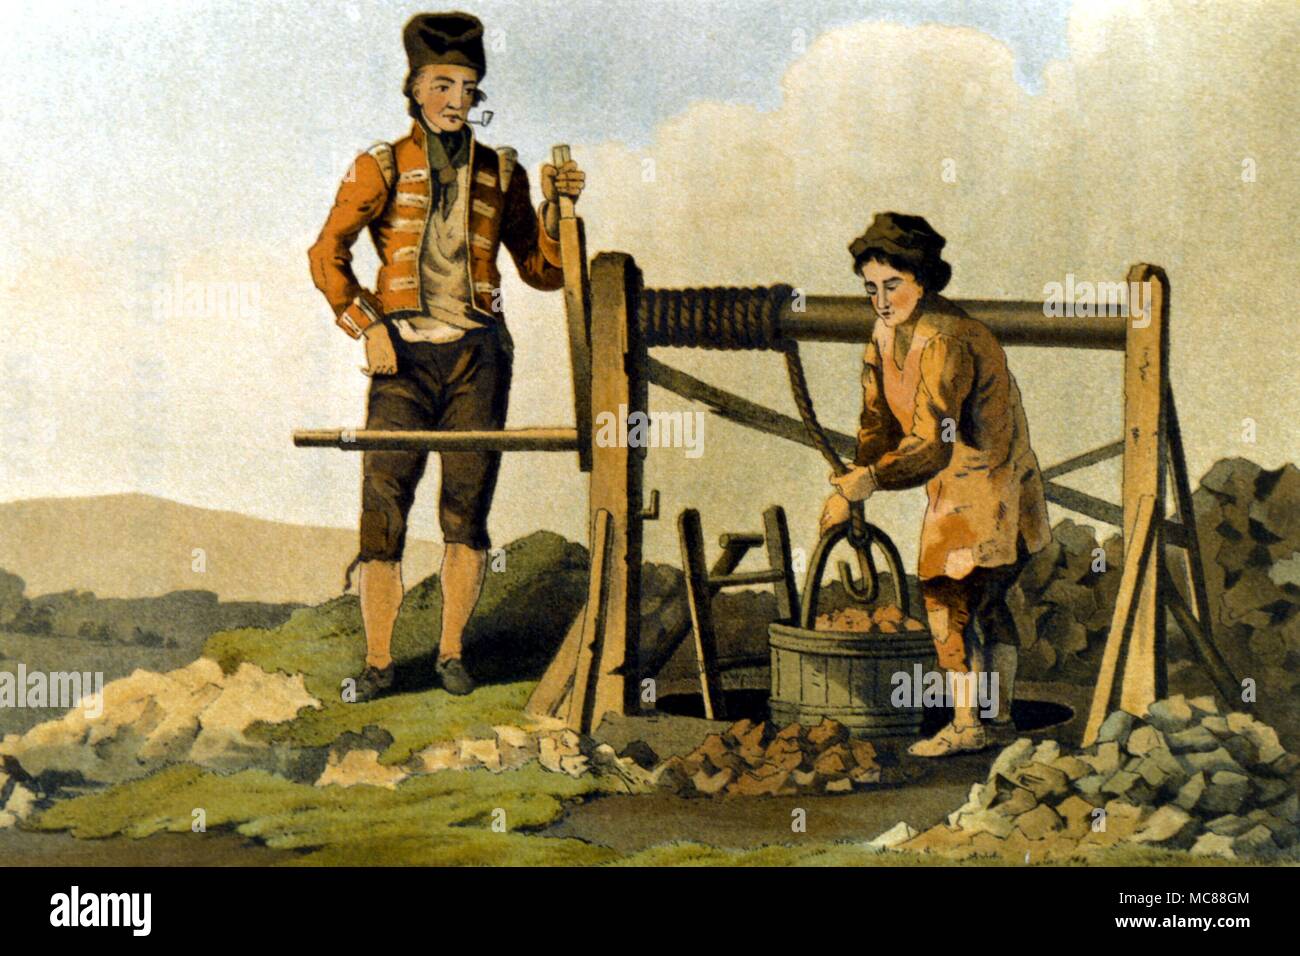 BRITISH HISTORY - EARLY 19TH CENTURY The Ruddle pit workers. From the 1885 edition of Richard Jackson's 'The Costumes of Yorkshire'. Stock Photo